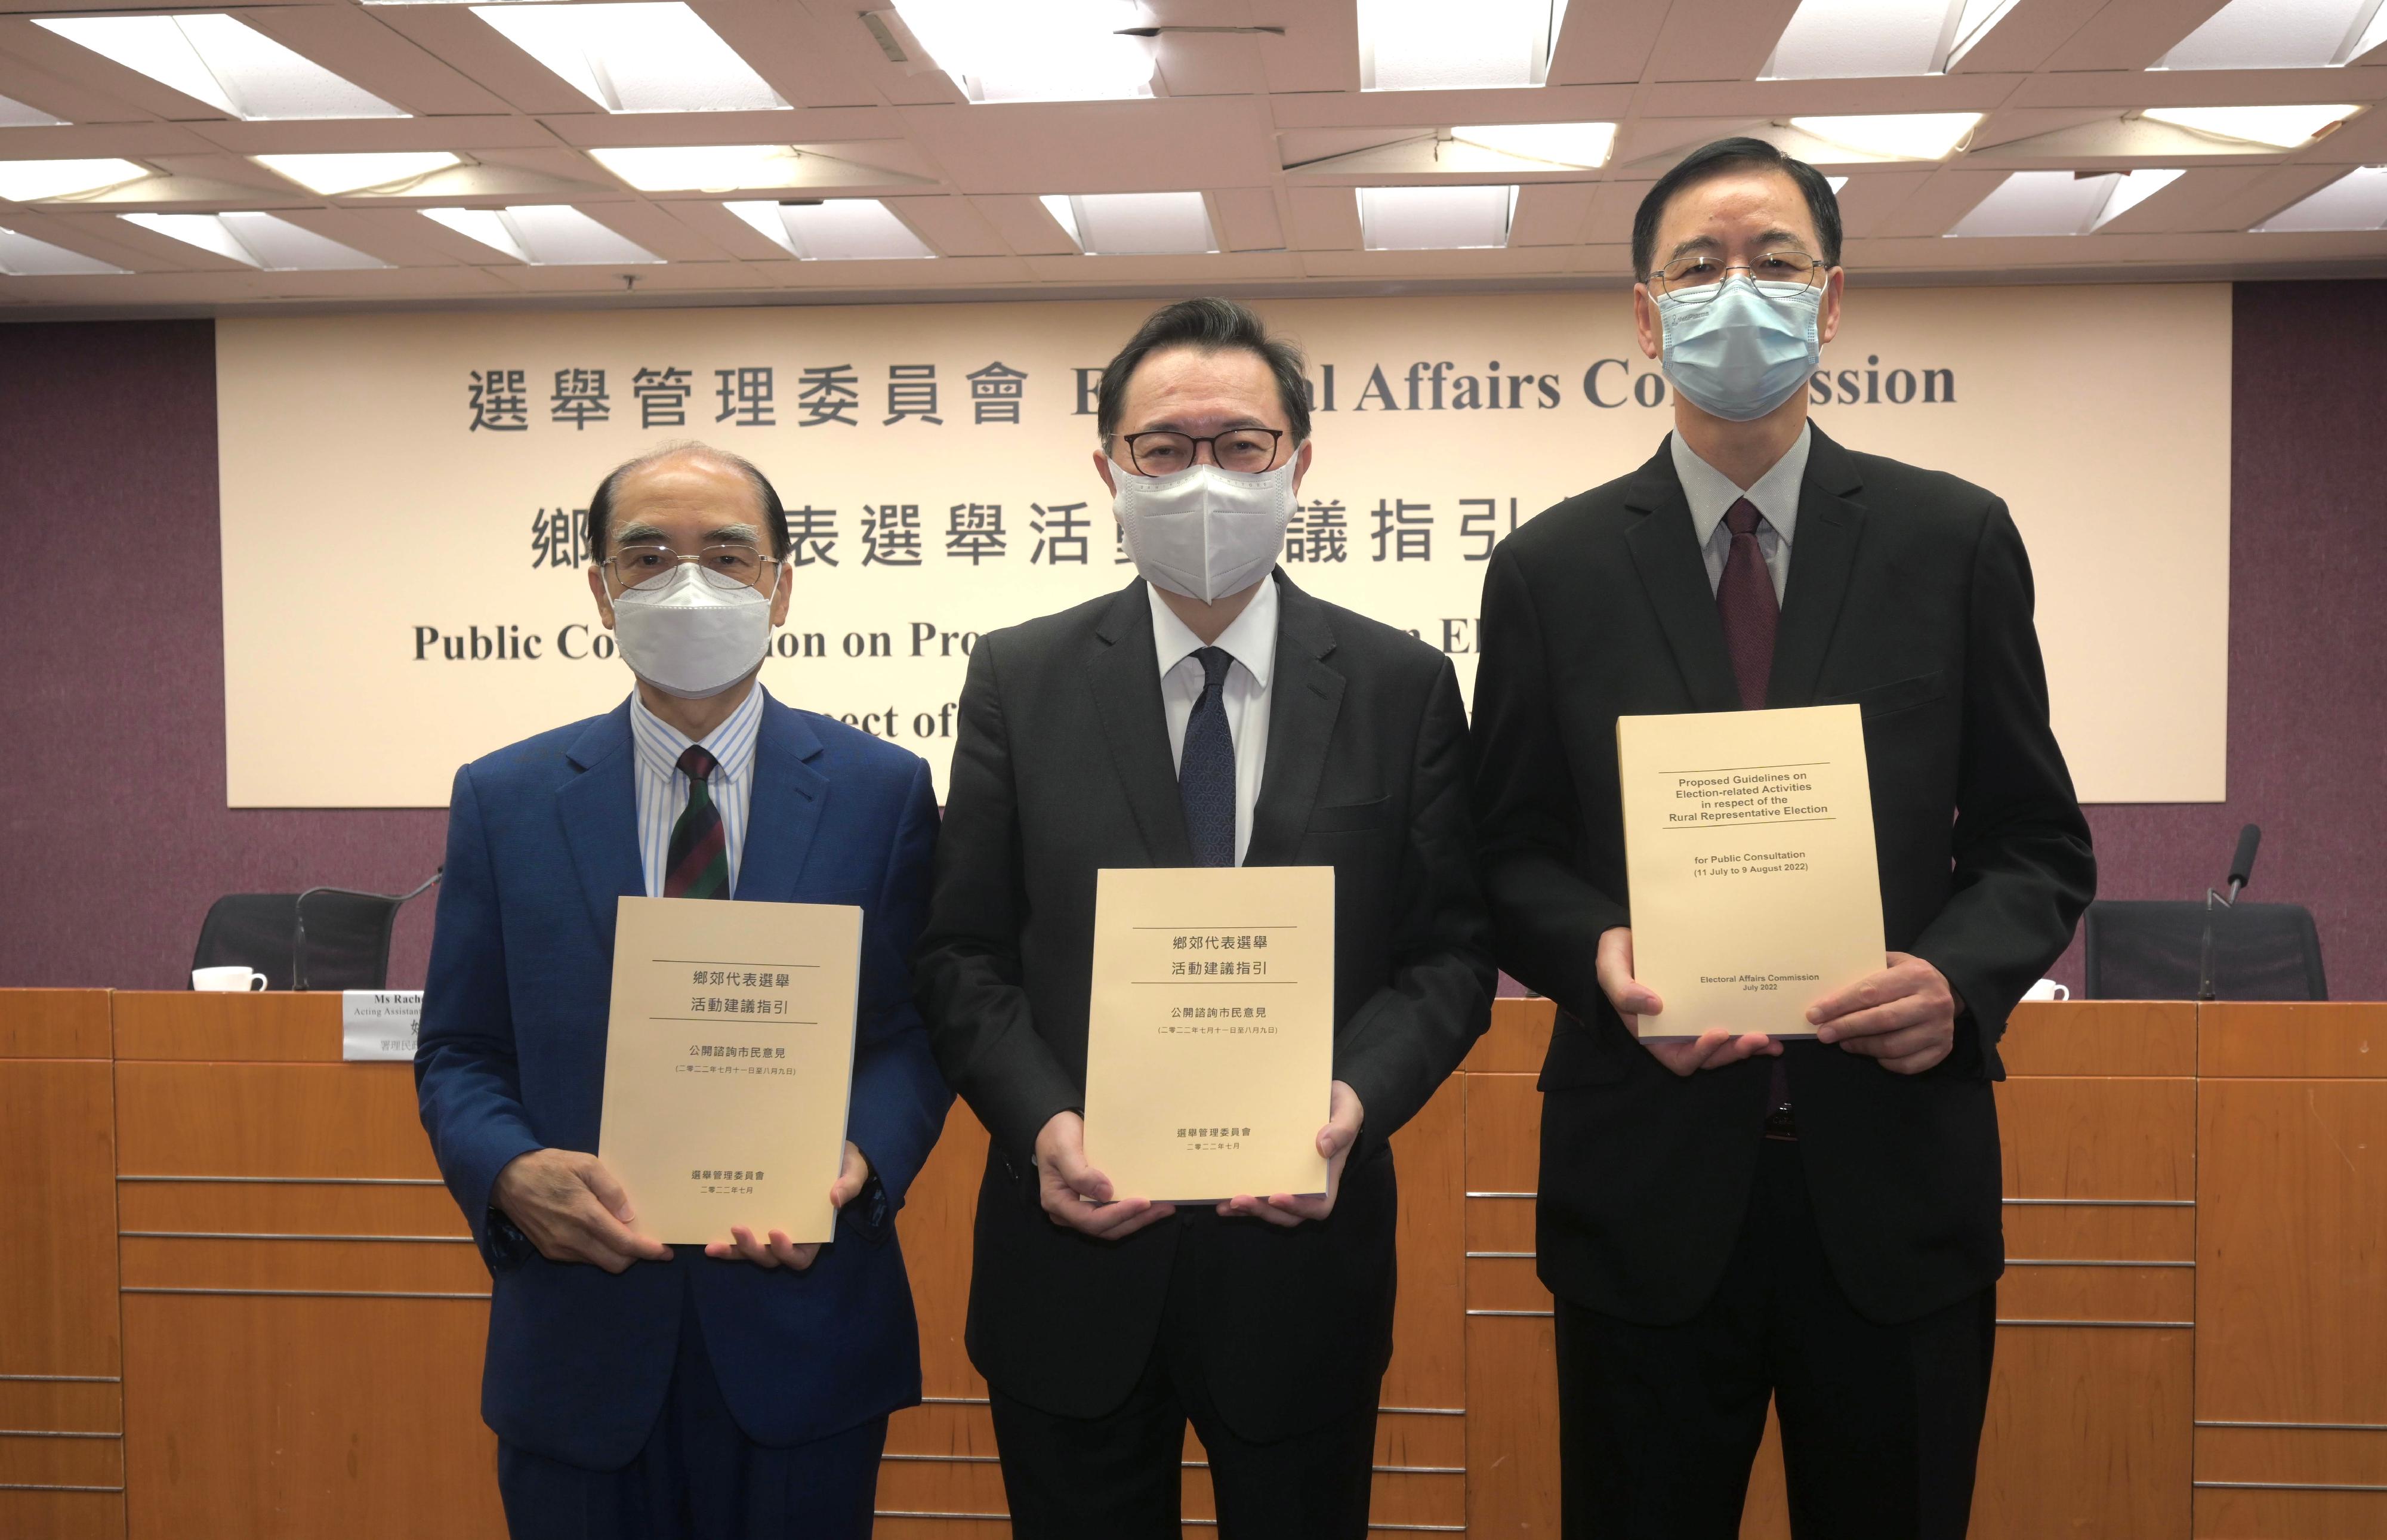 The Chairman of the Electoral Affairs Commission (EAC), Mr Justice Barnabas Fung Wah (centre), and EAC members Mr Arthur Luk, SC (left), and Professor Daniel Shek (right) present the Proposed Guidelines on Election-related Activities in respect of the Rural Representative Election at a press conference today (July 11).